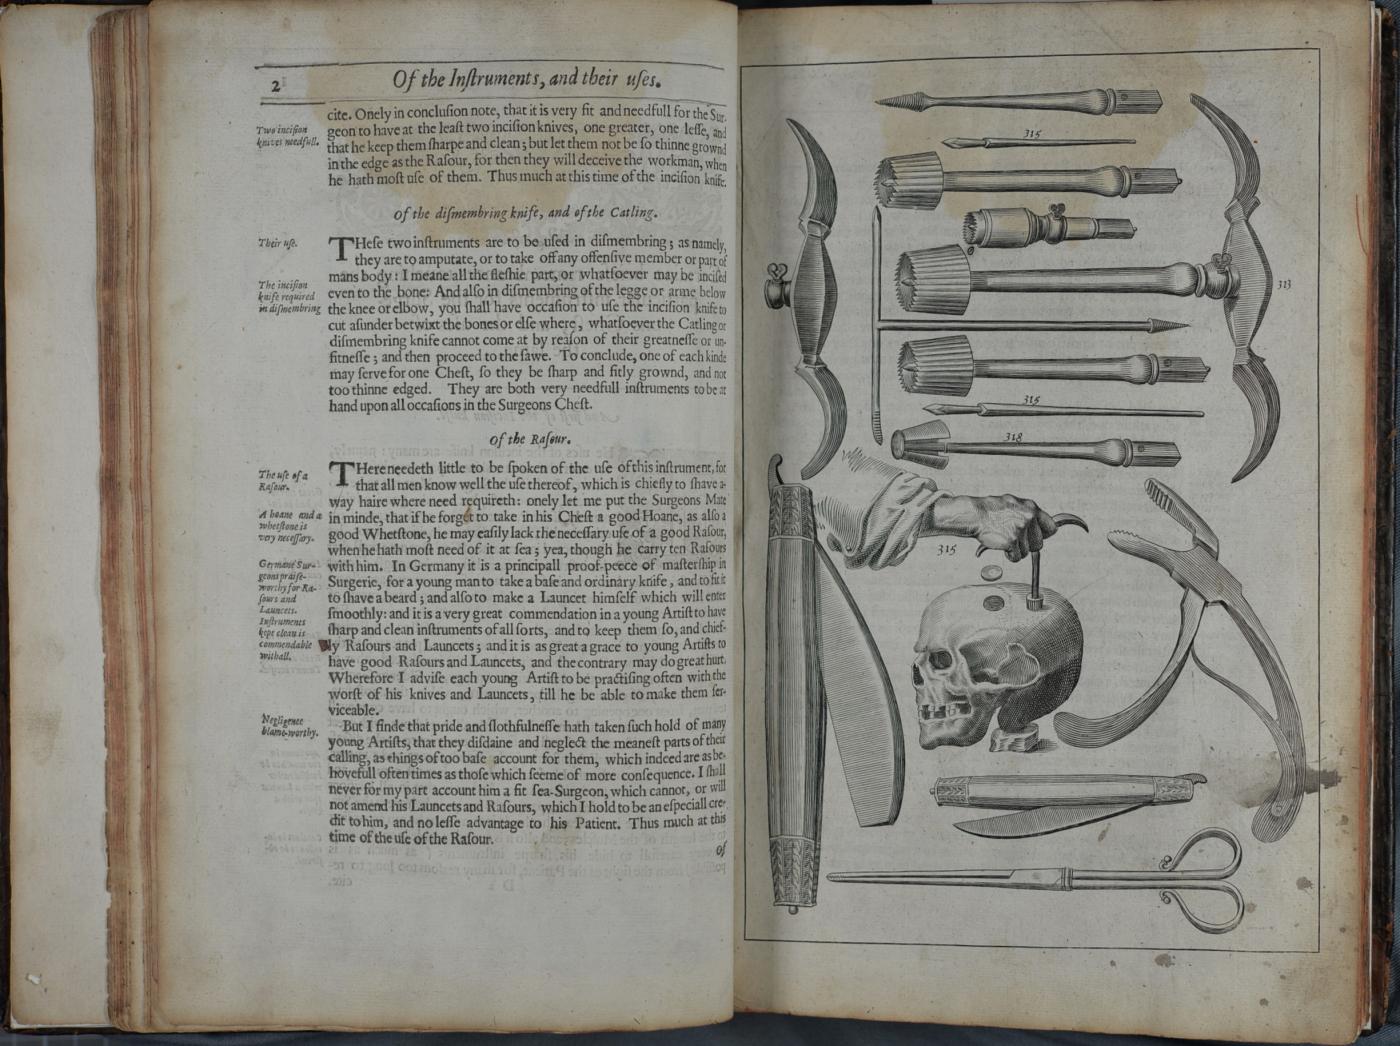 An image showing 'Pages from John Woodall's The Surgeons Mate (RMG reference: PBP3639)'